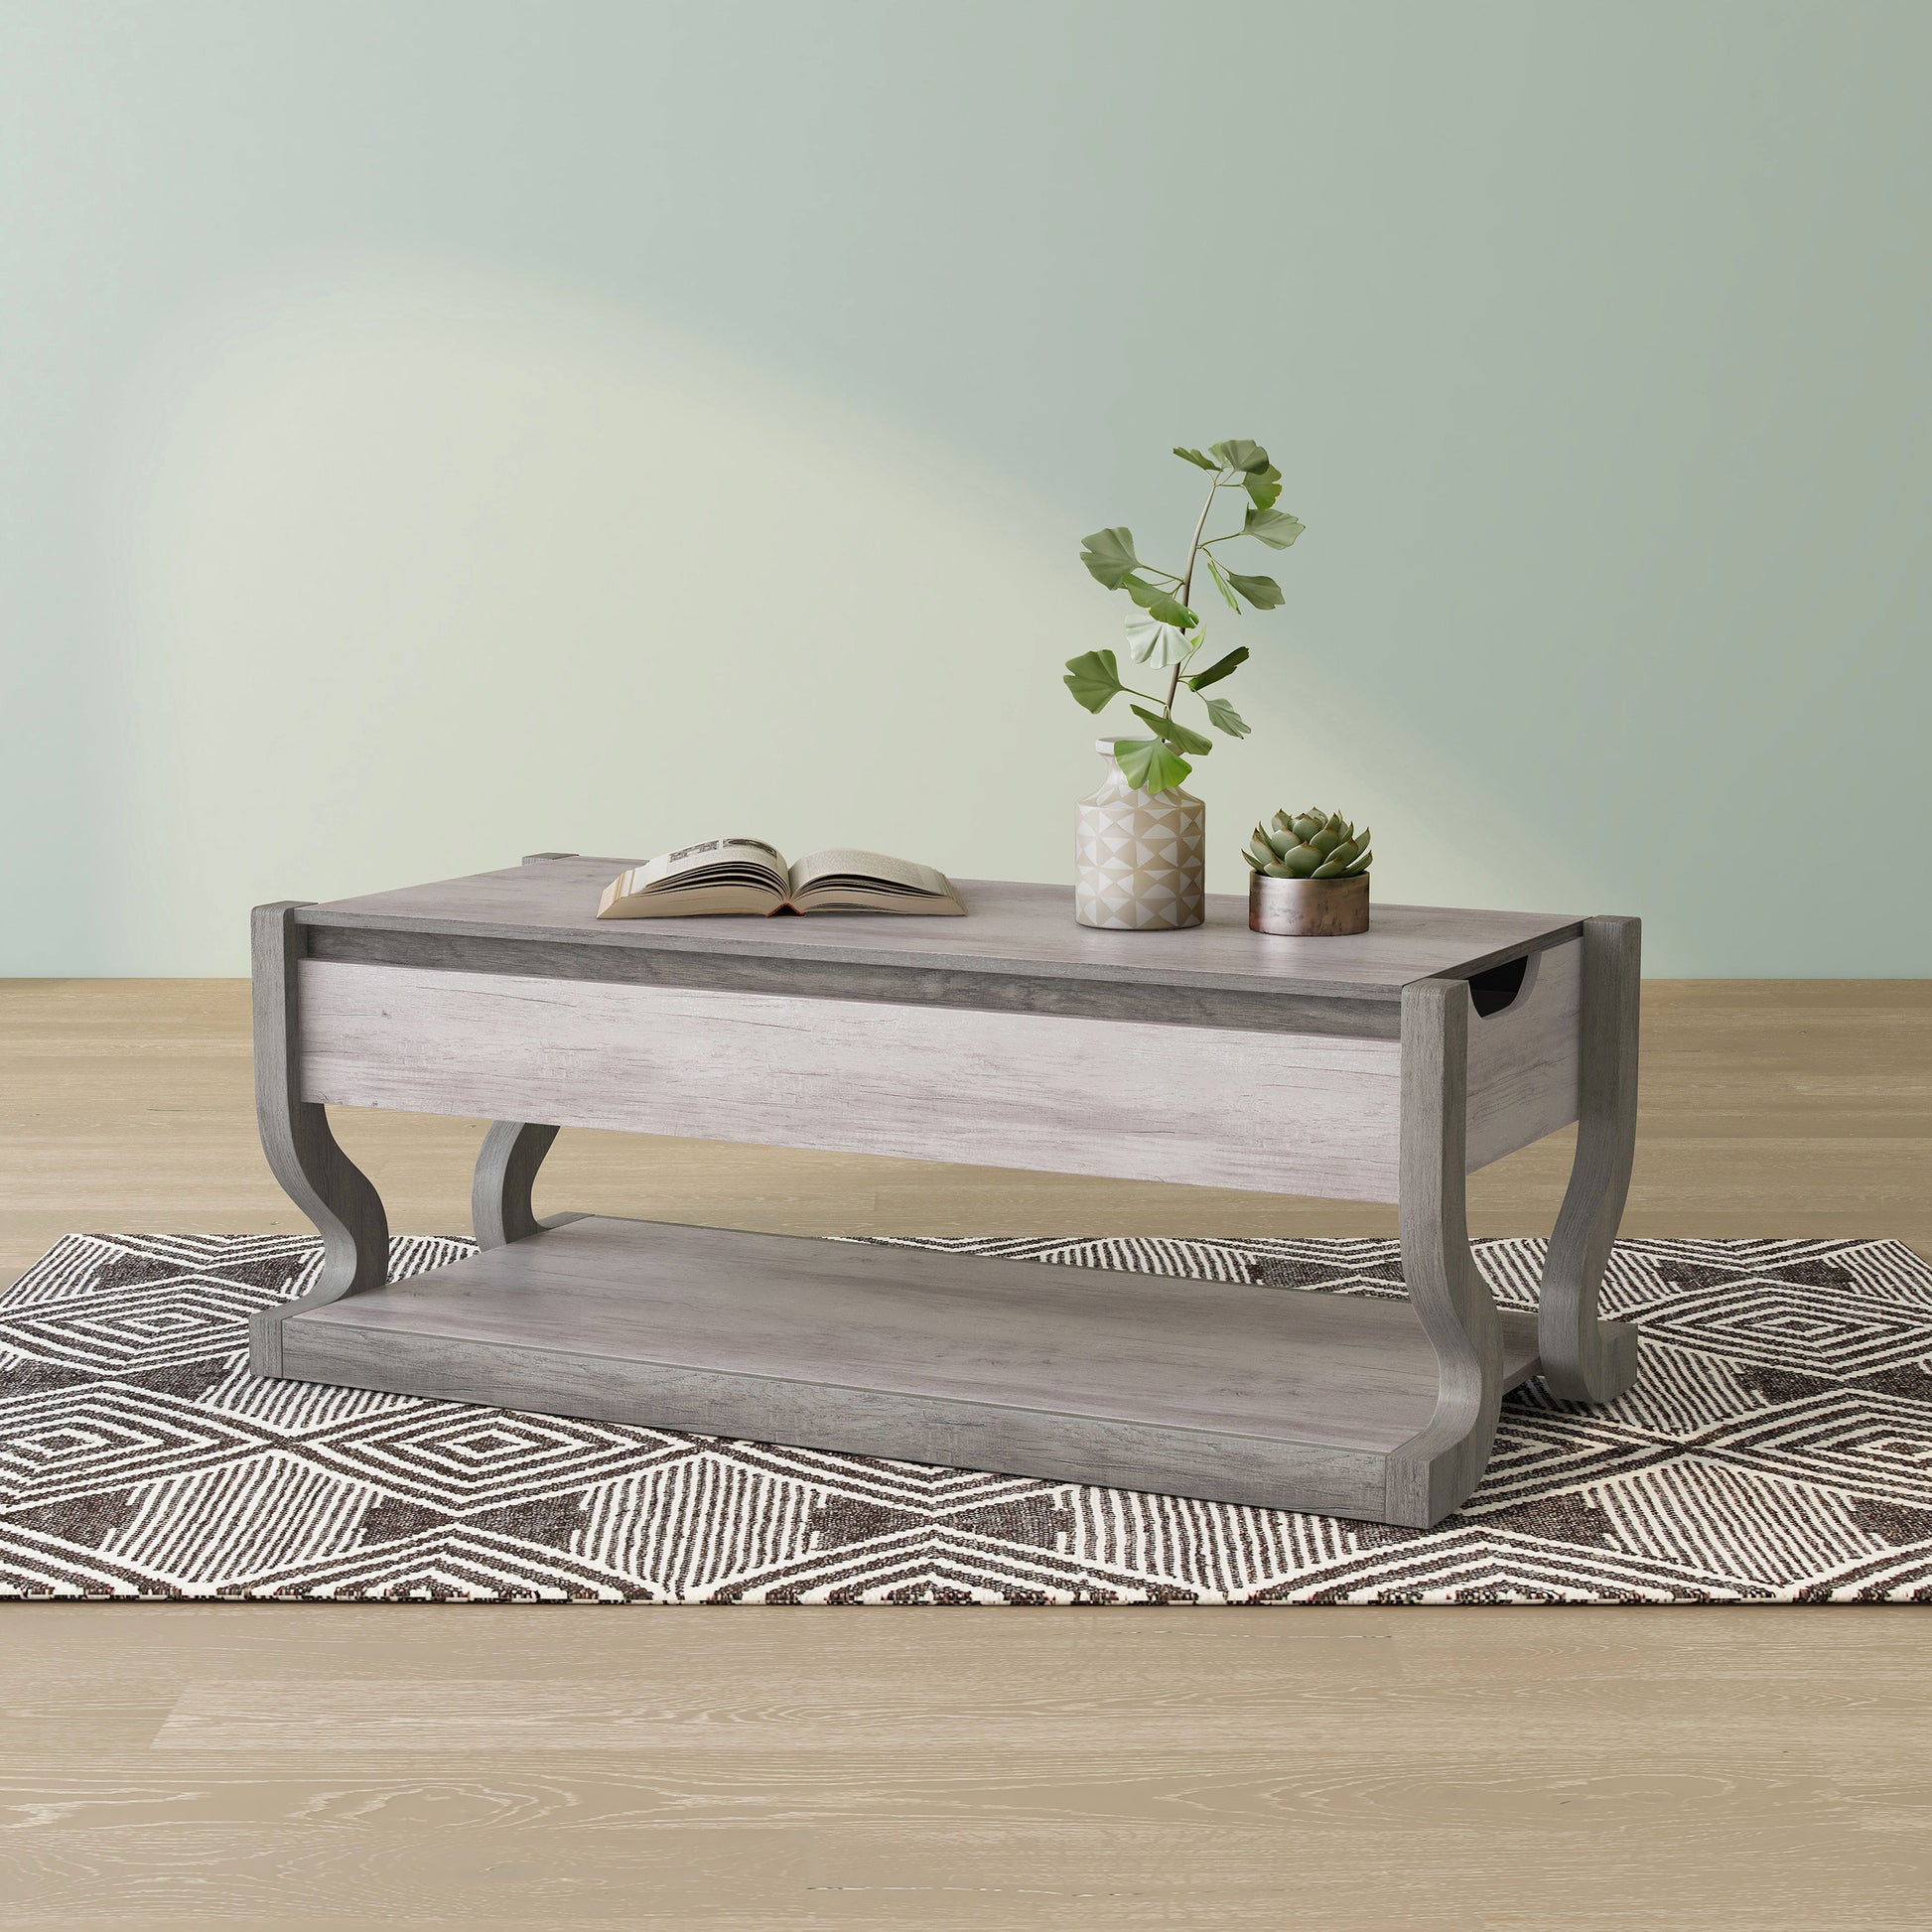 Left angled transitional coastal white lift-top coffee table with storage on an area rug with accessories